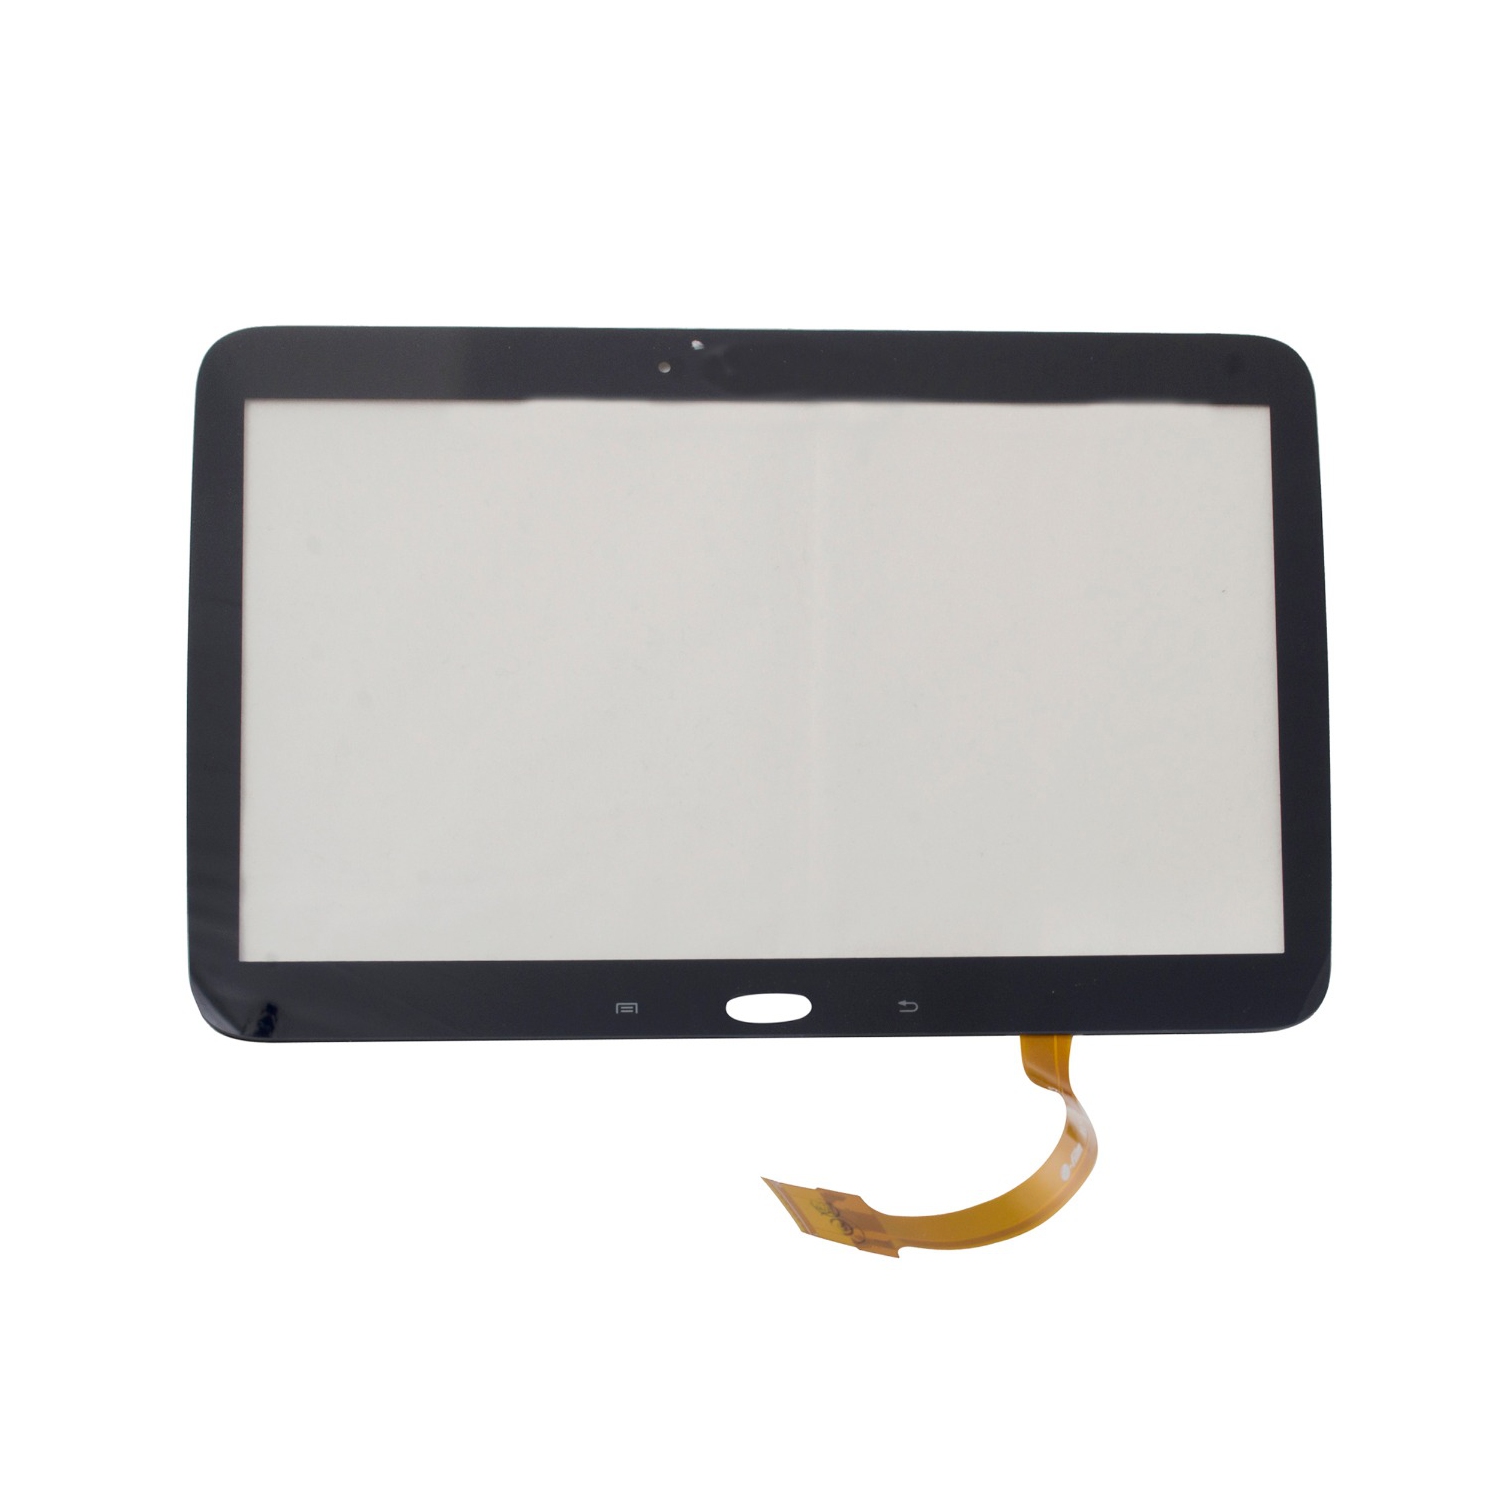 Replacement Display Touch Screen Digitizer For Samsung Galaxy Tab 3 10.1 P5200 P5210 P5220 - Black